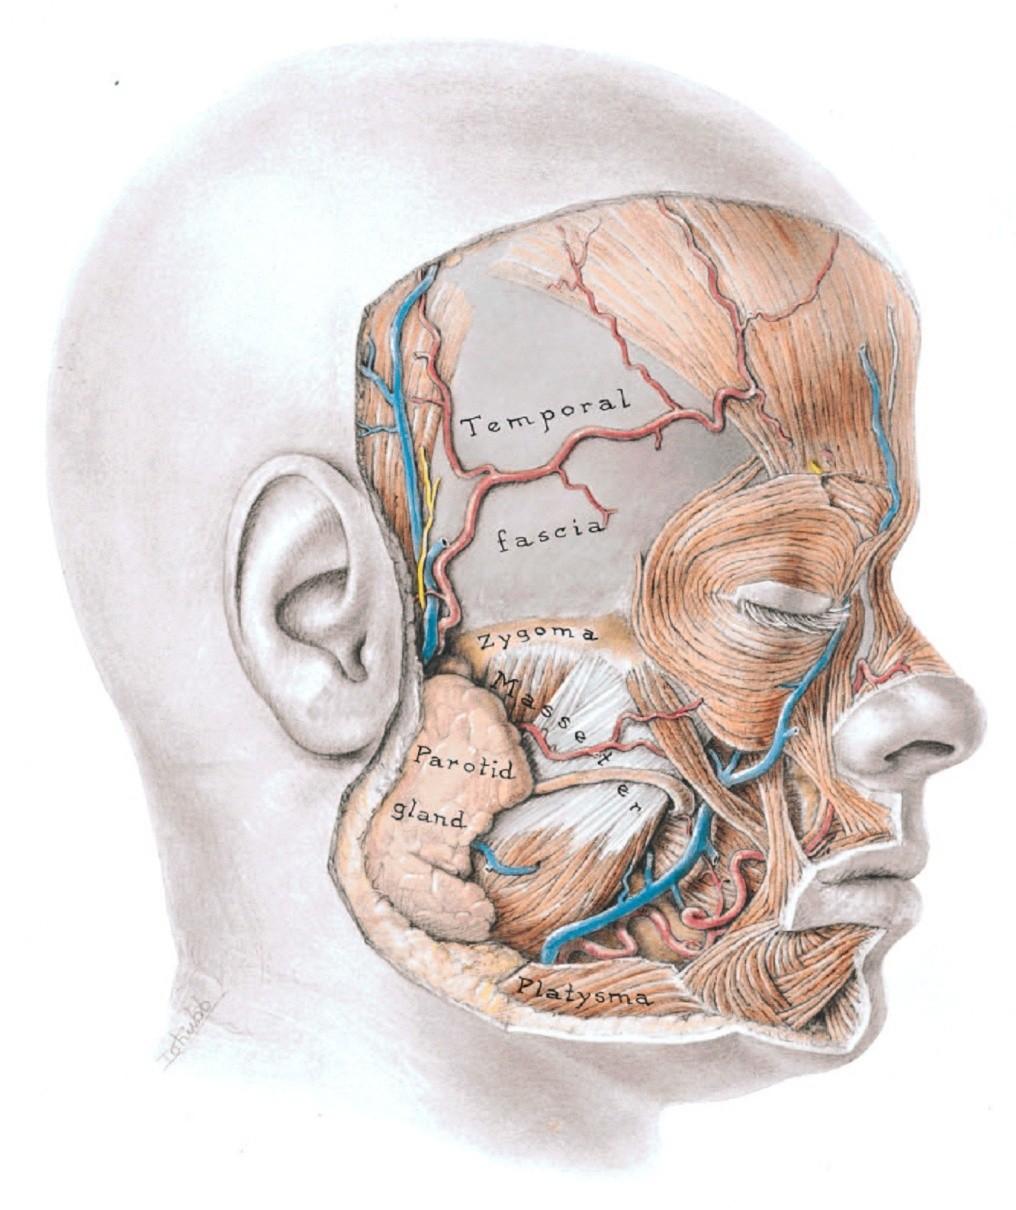 Deep fascia exists in the regions of the parotid glands and the masseter muscles.